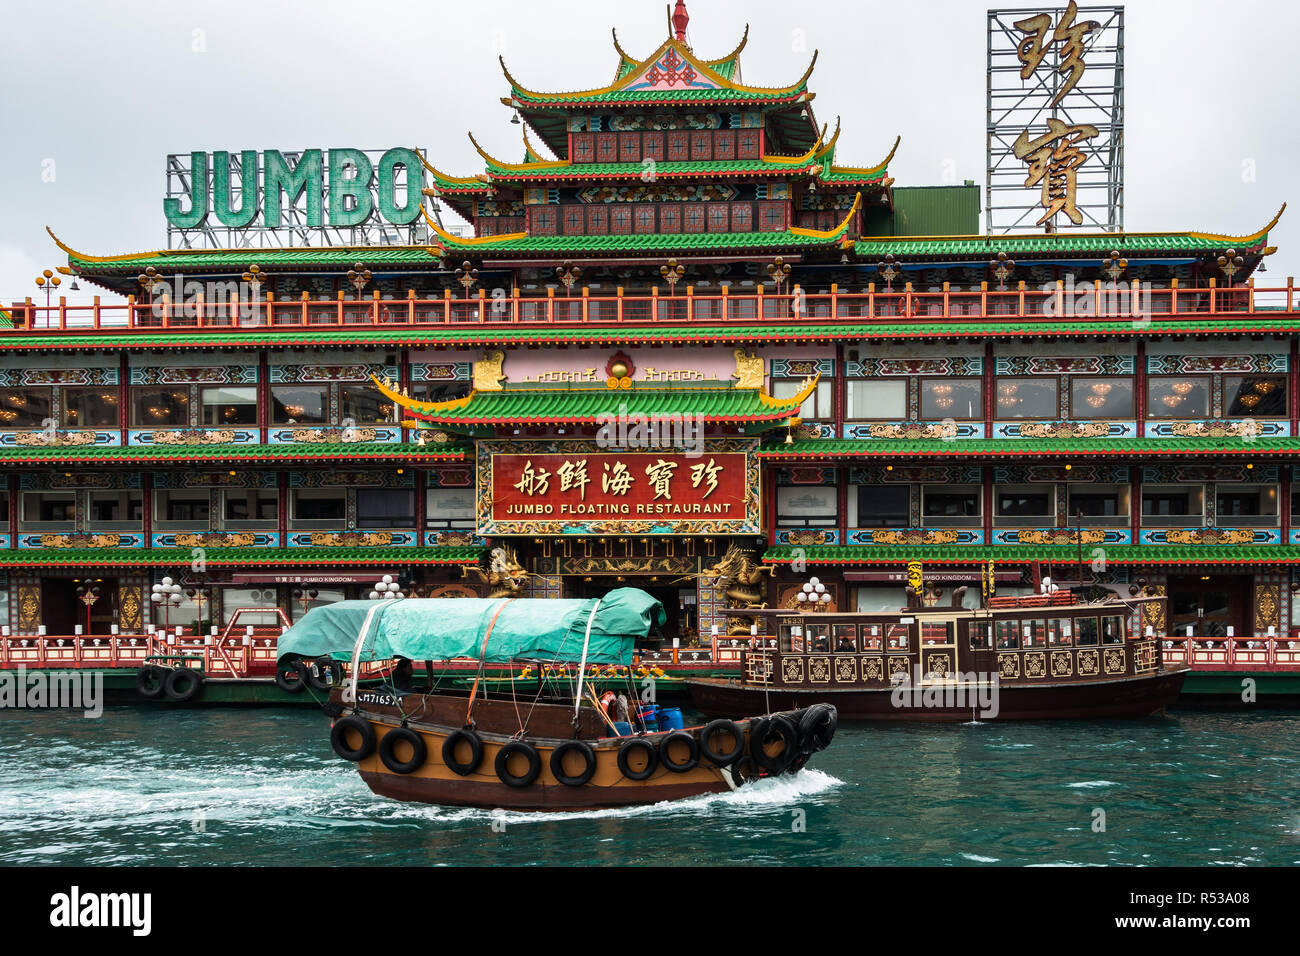 A traditional chinese sampan boat and Jumbo floating restaurant, one of the most famous landmark of Hong Kong Stock Photo